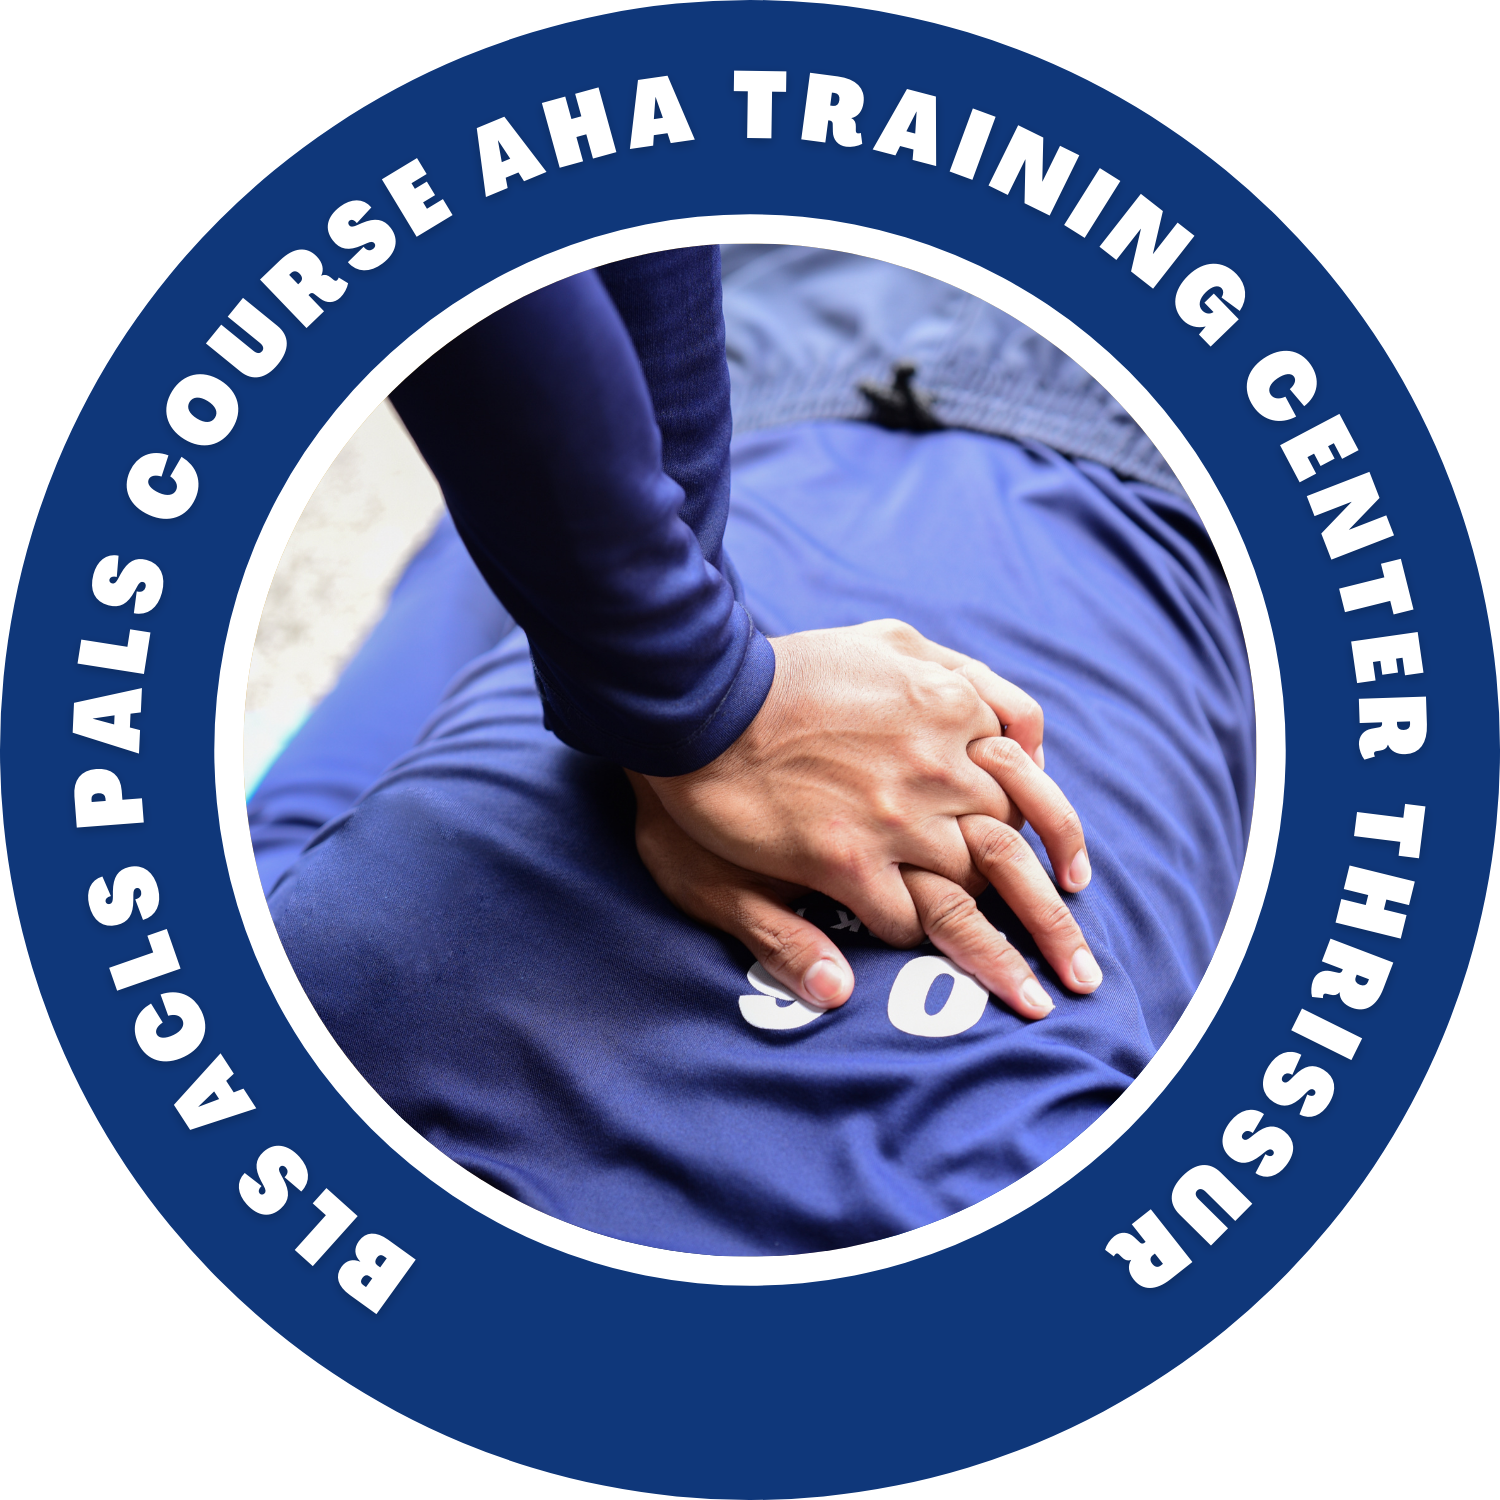 Bls Acls Pals Course AHA Training Center Thrissur|Colleges|Education